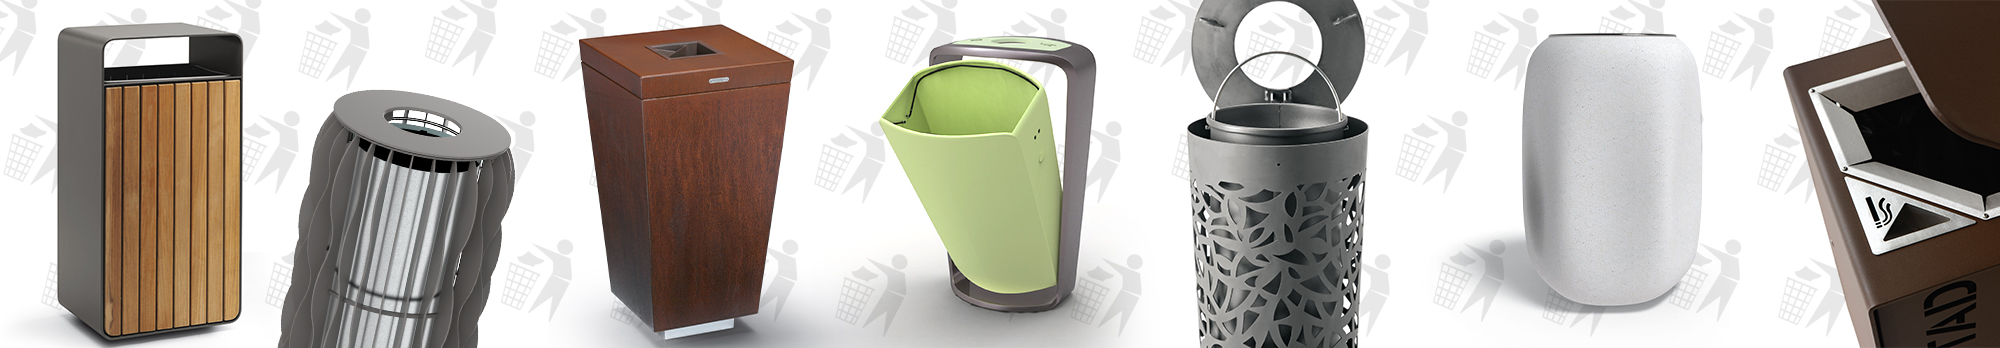 LITTER BINS & RECYCLE SYSTEMS